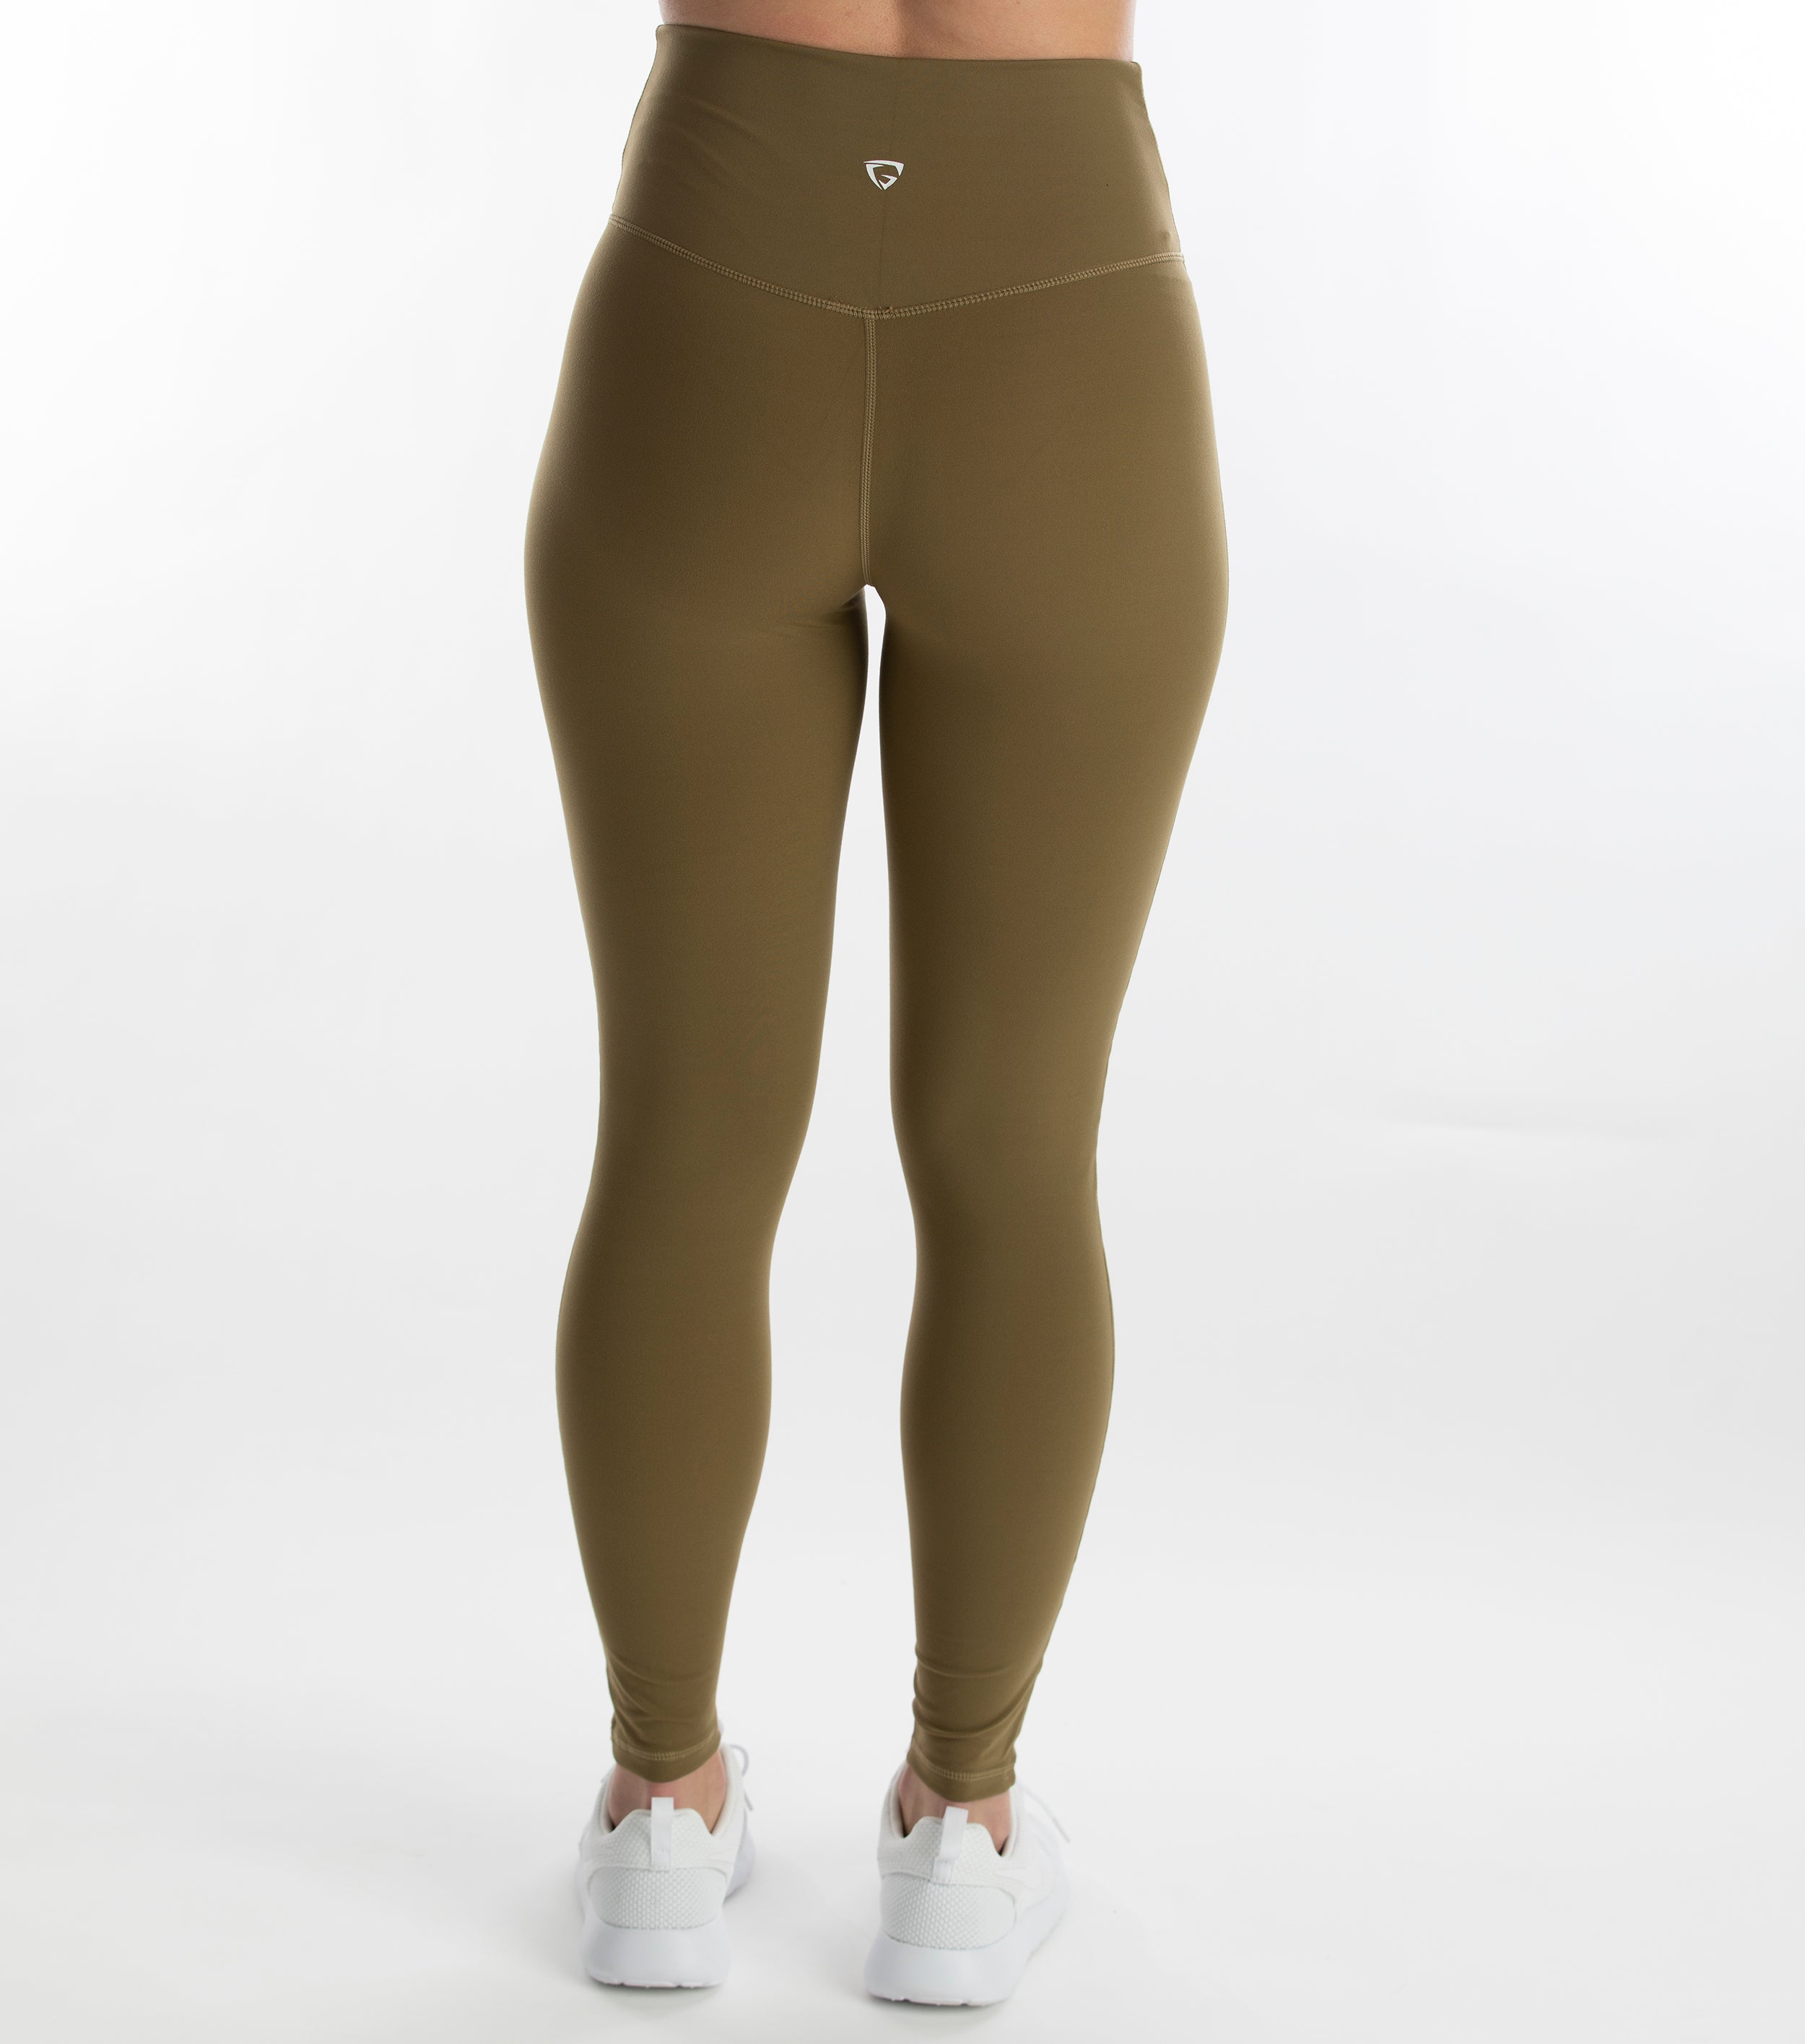 Hollow-Out Control Top Leggings (Army Green)